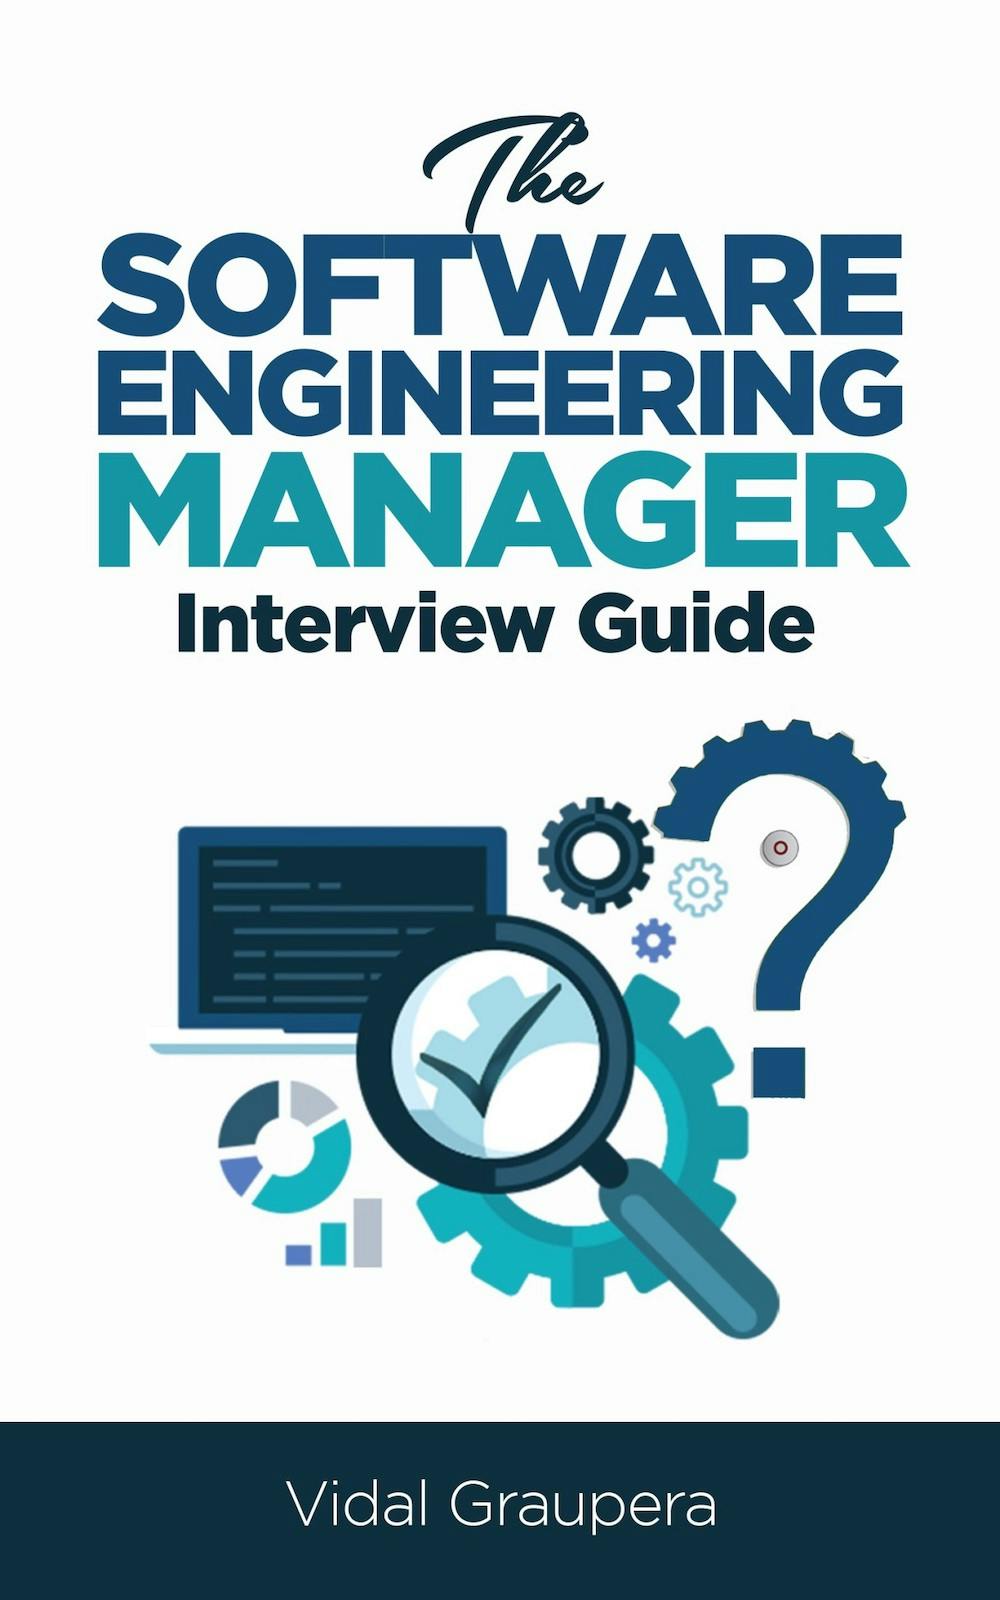 image for The Software Engineering Manager Interview Guide